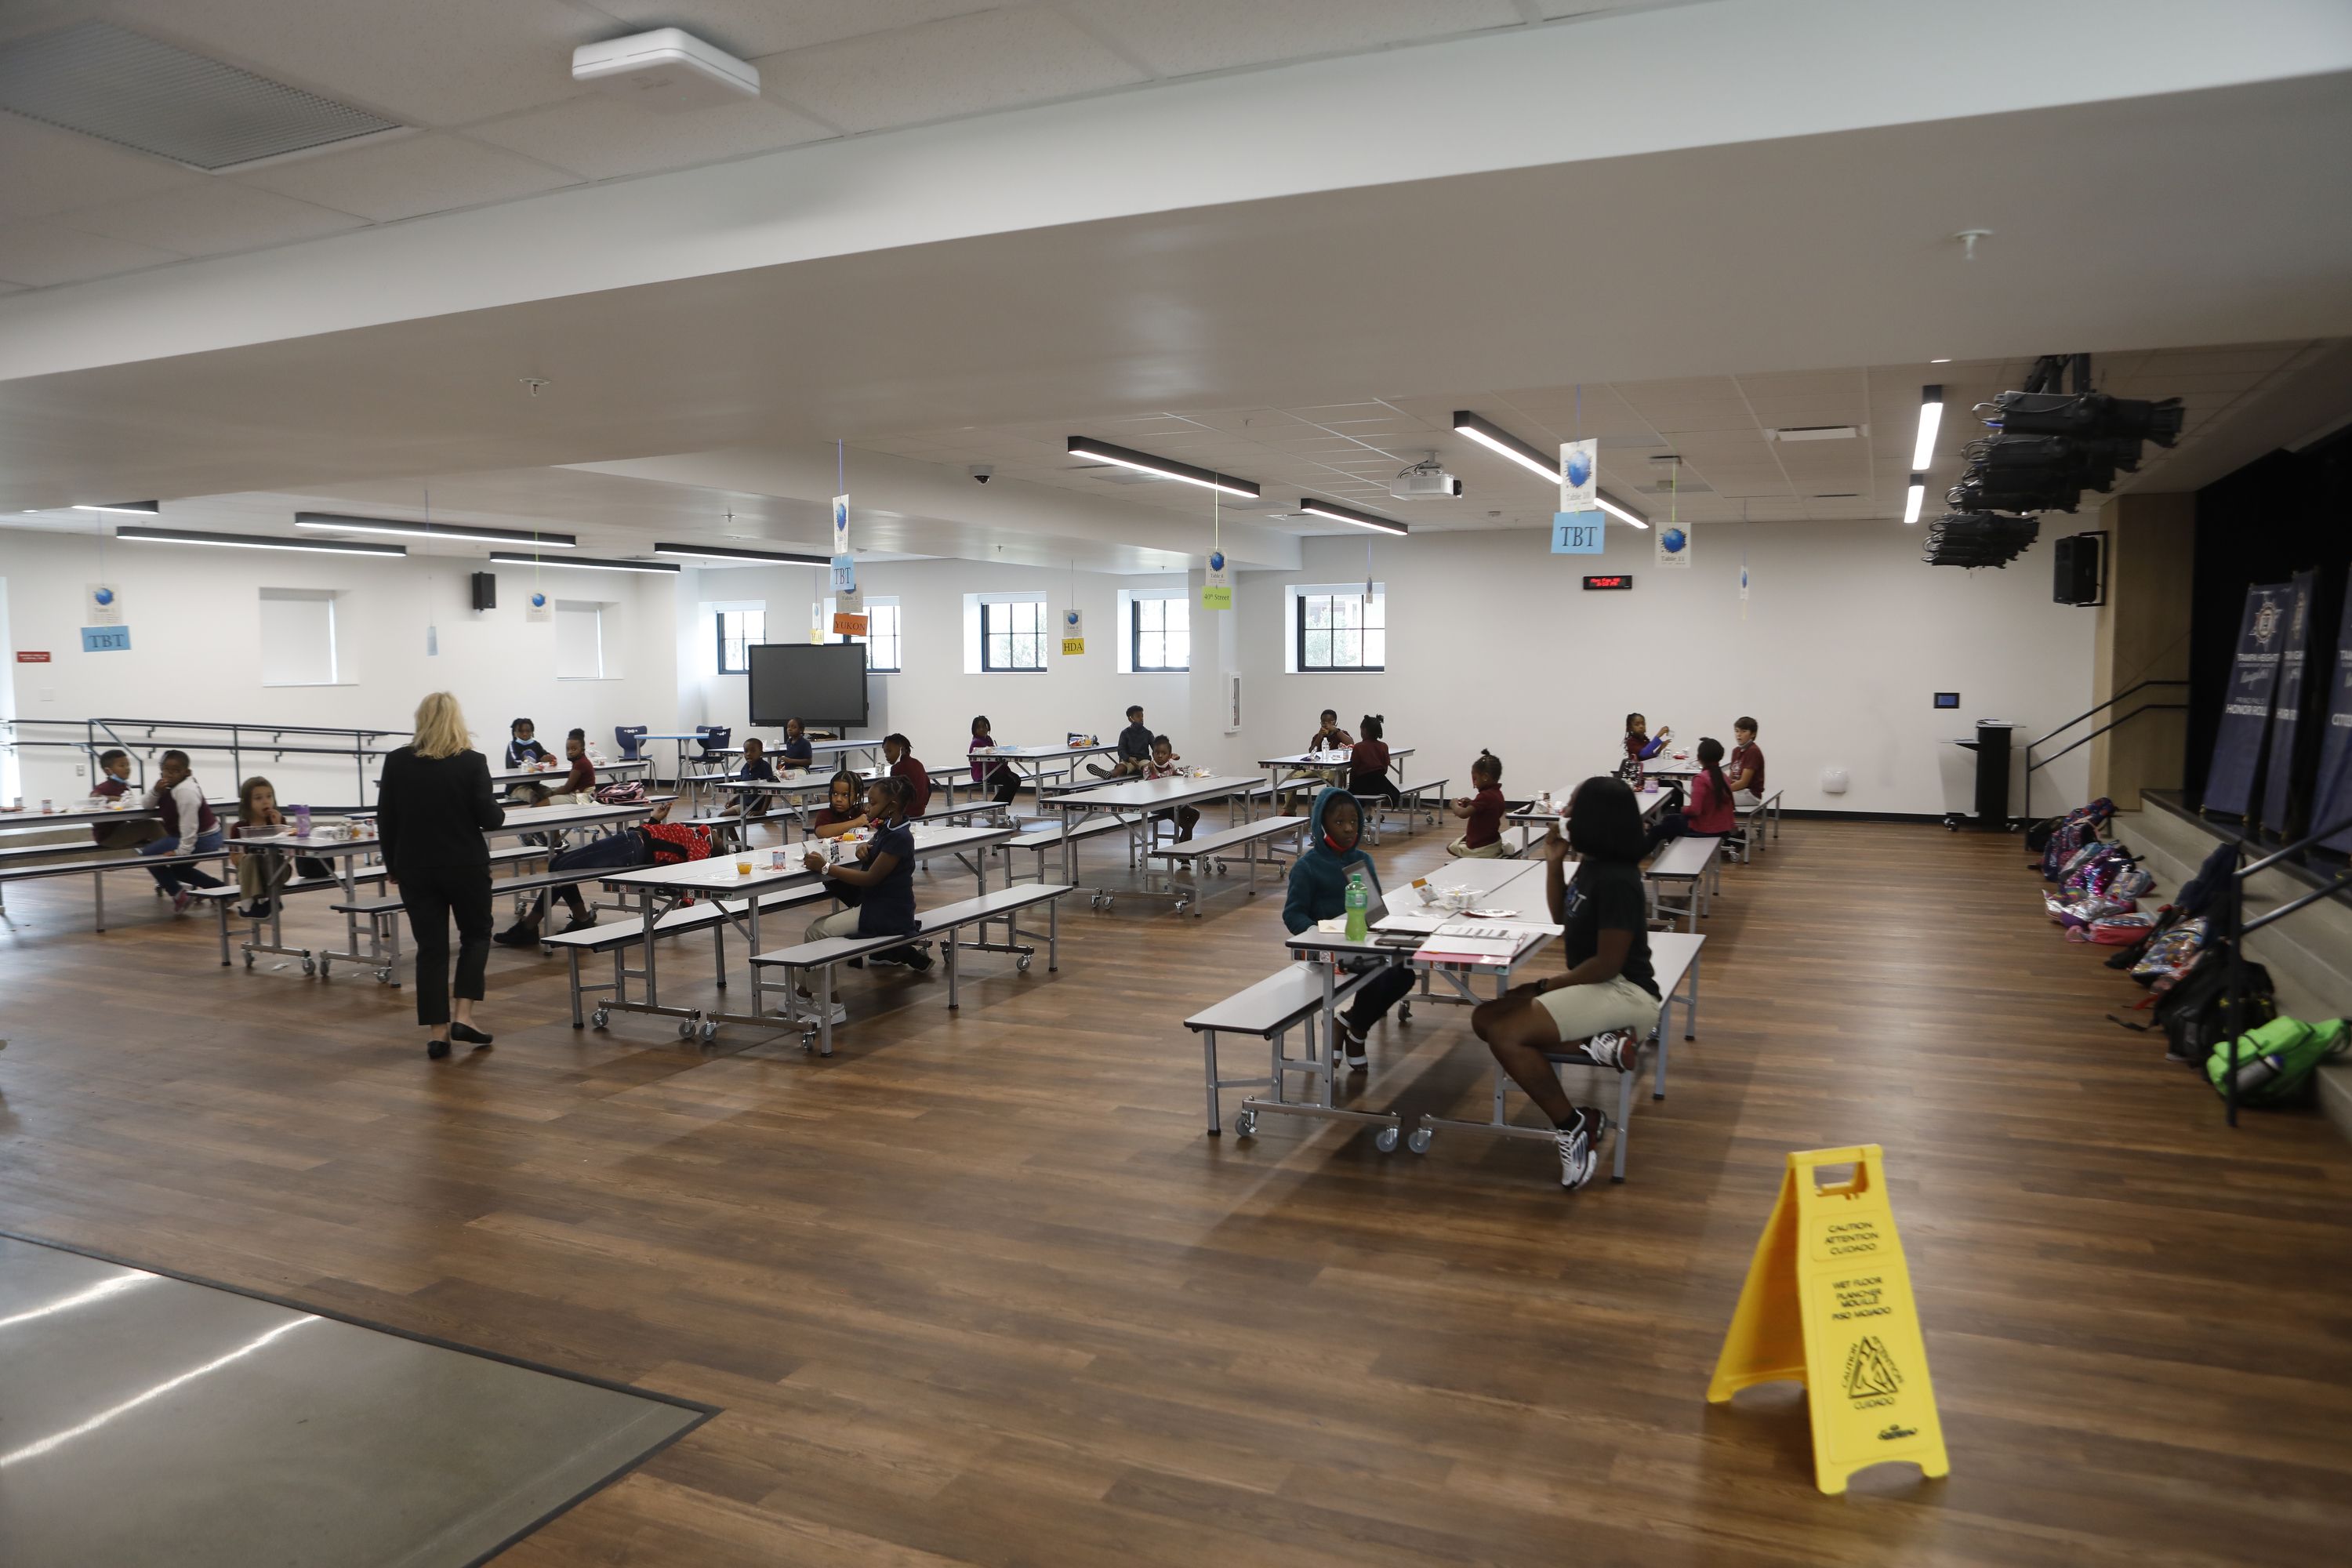 Students eat inside the newly renovated cafeteria at the Tampa Heights Elementary School on Columbus Avenue in Tampa.